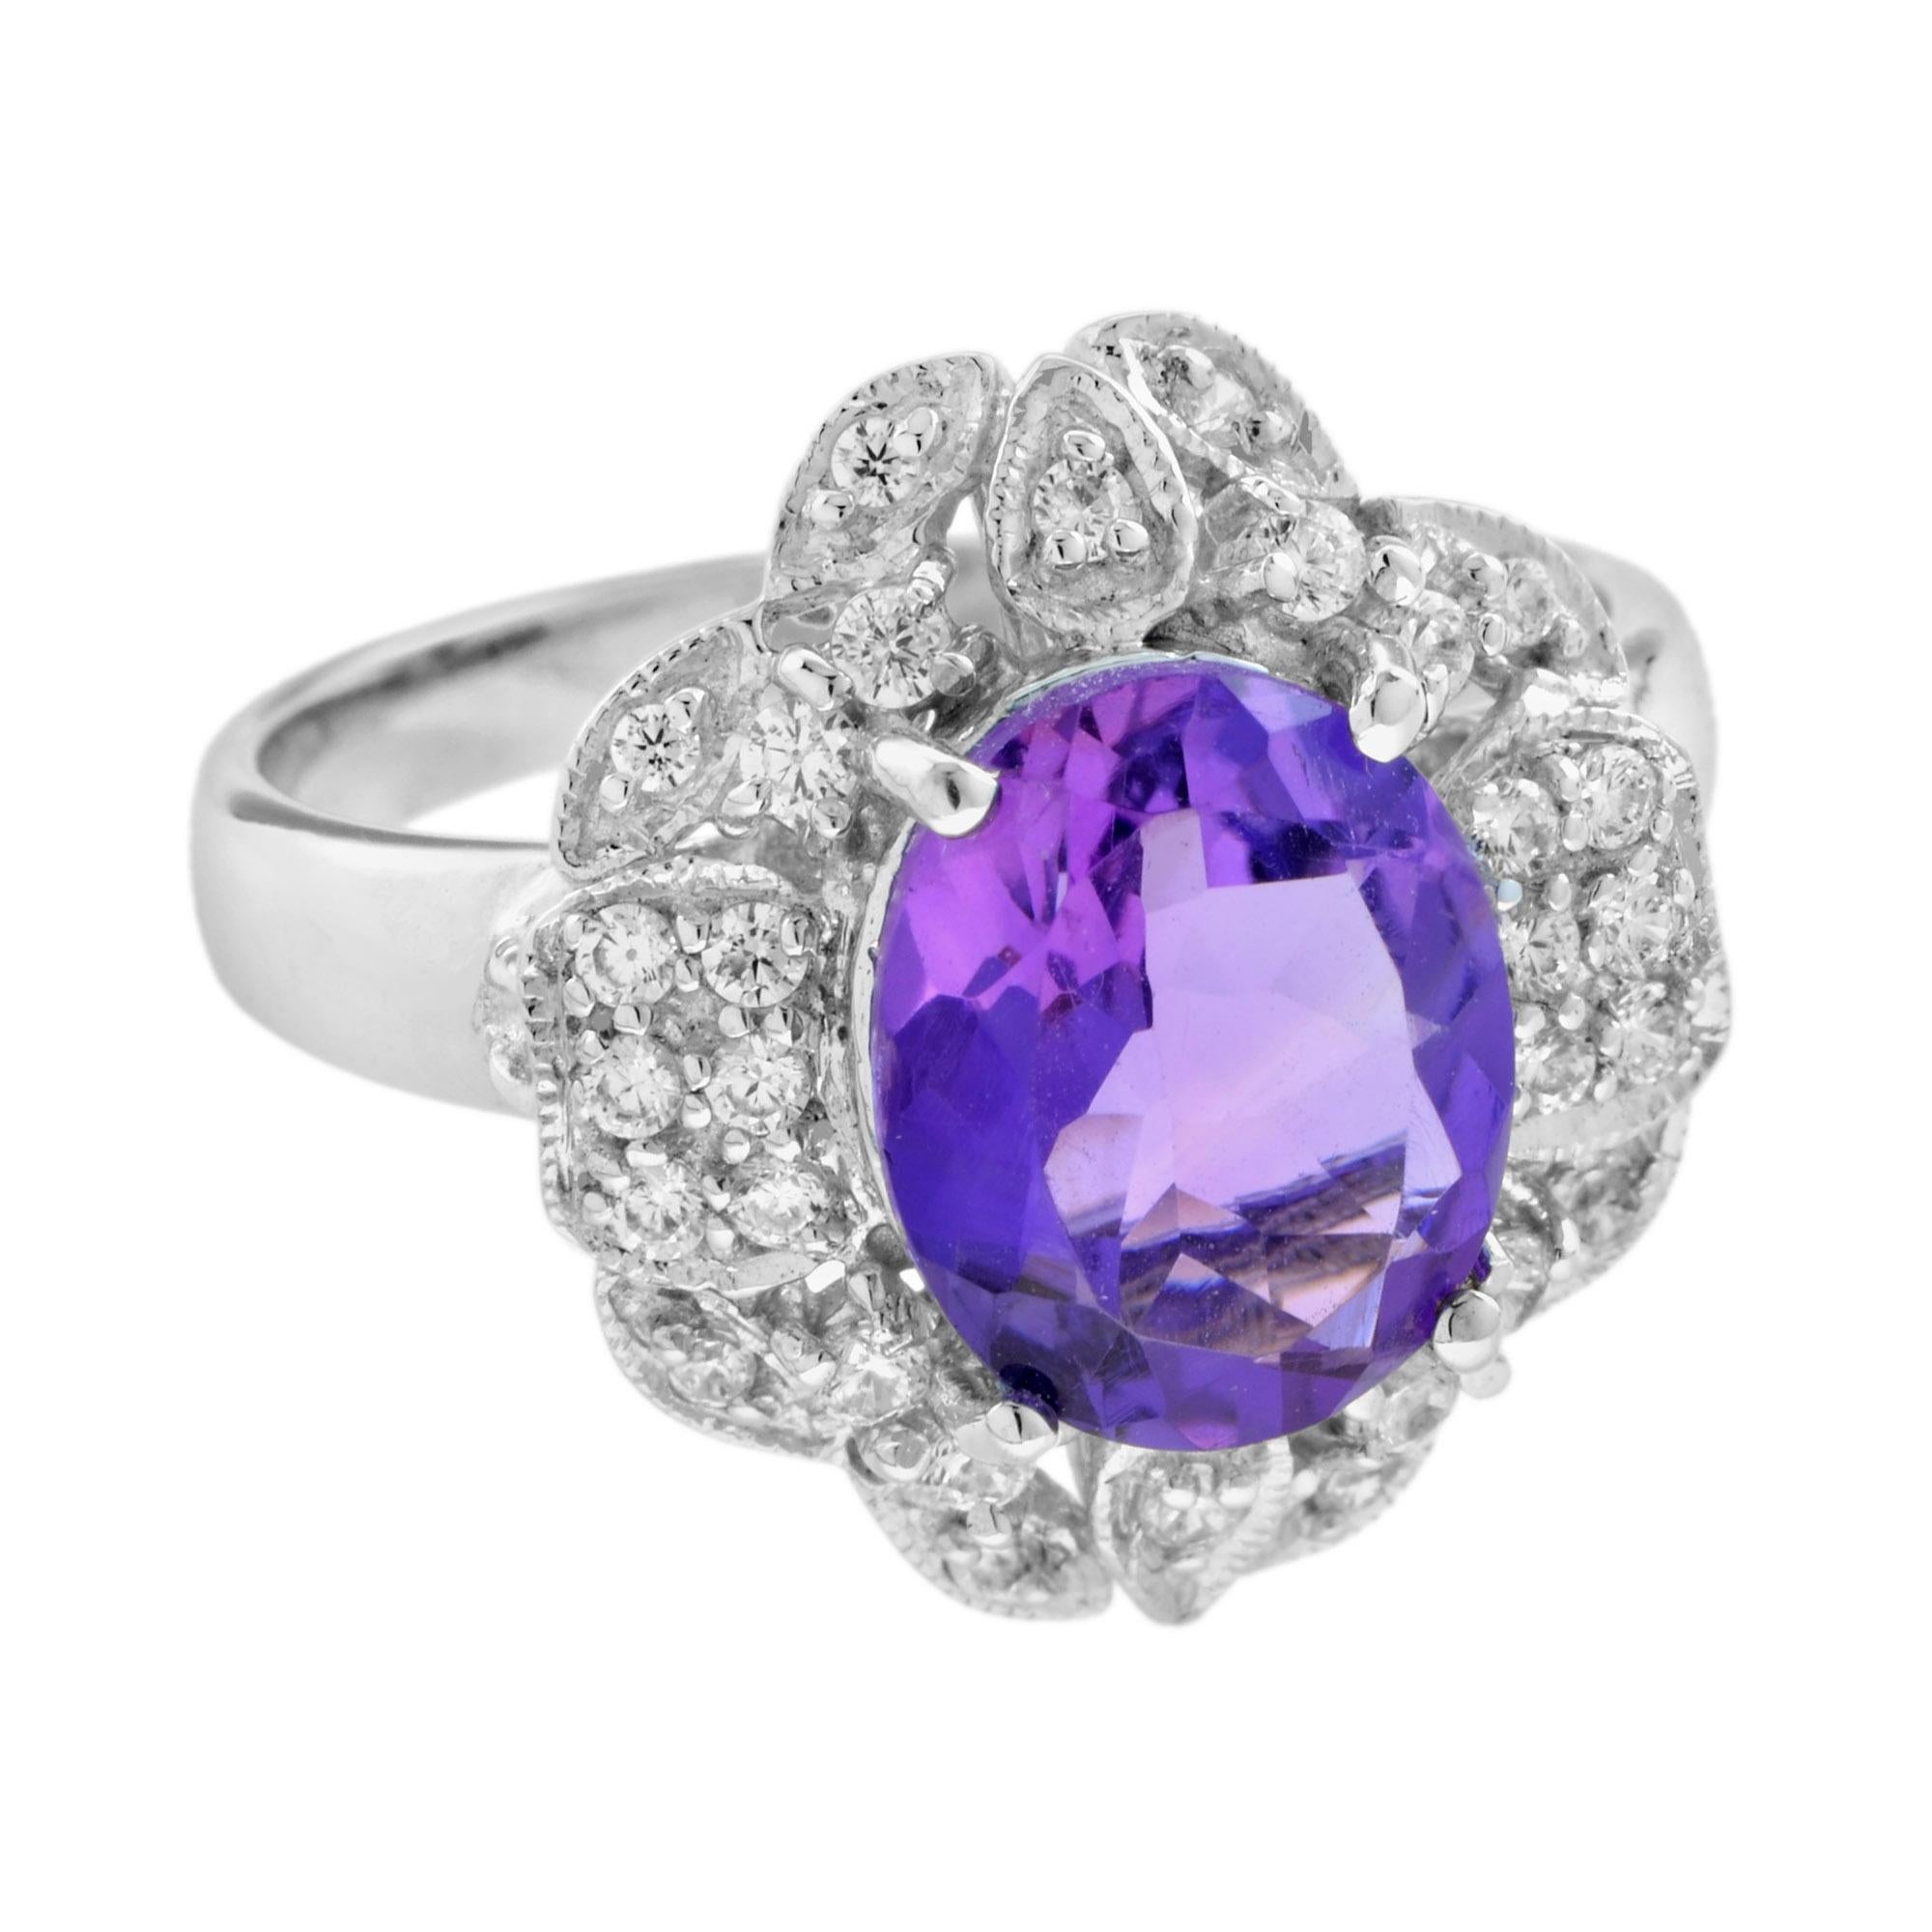 For Sale:  2.6 Ct. Amethyst and Diamond Halo Ring in 18K White Gold 2